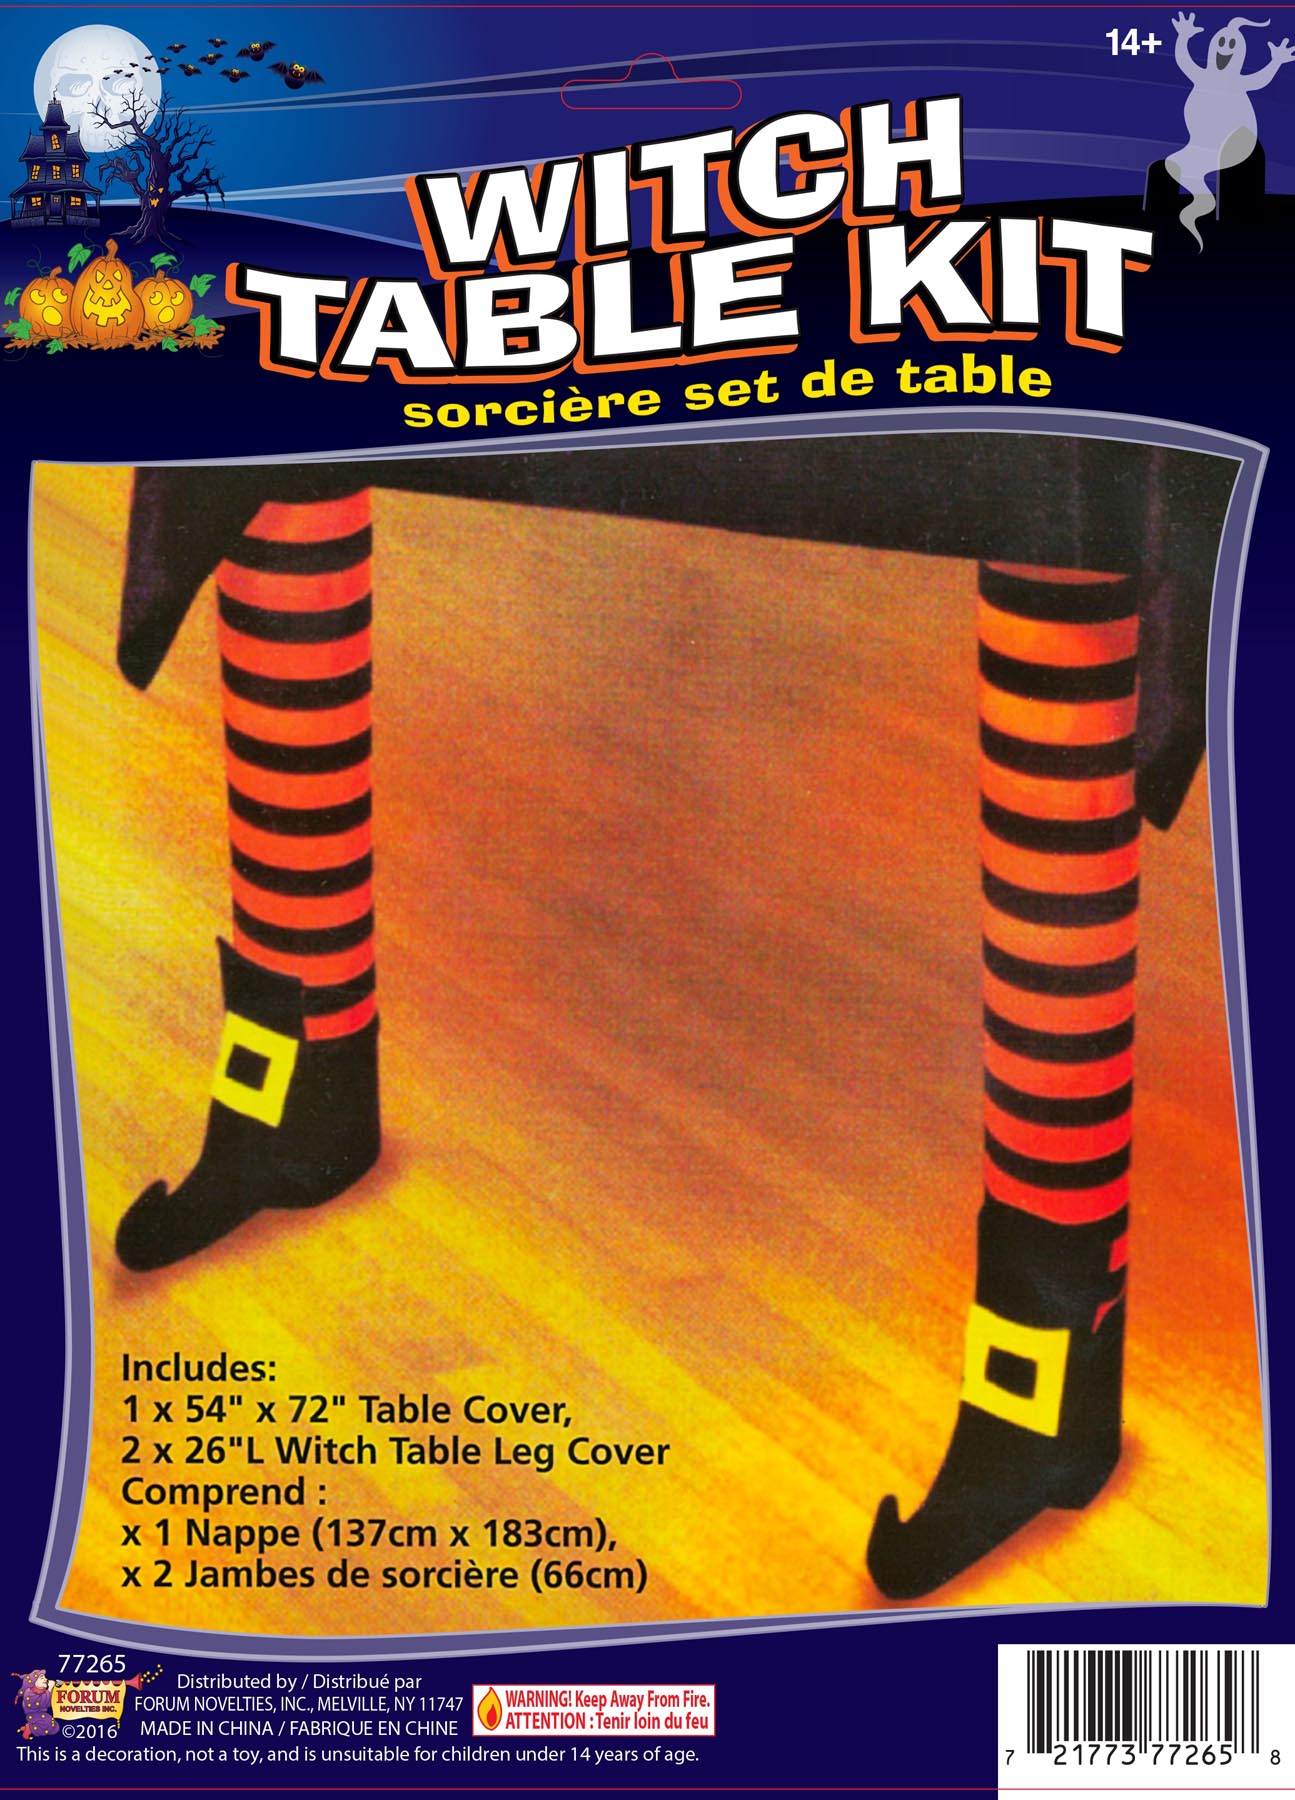 Table cover and two witch leg covers